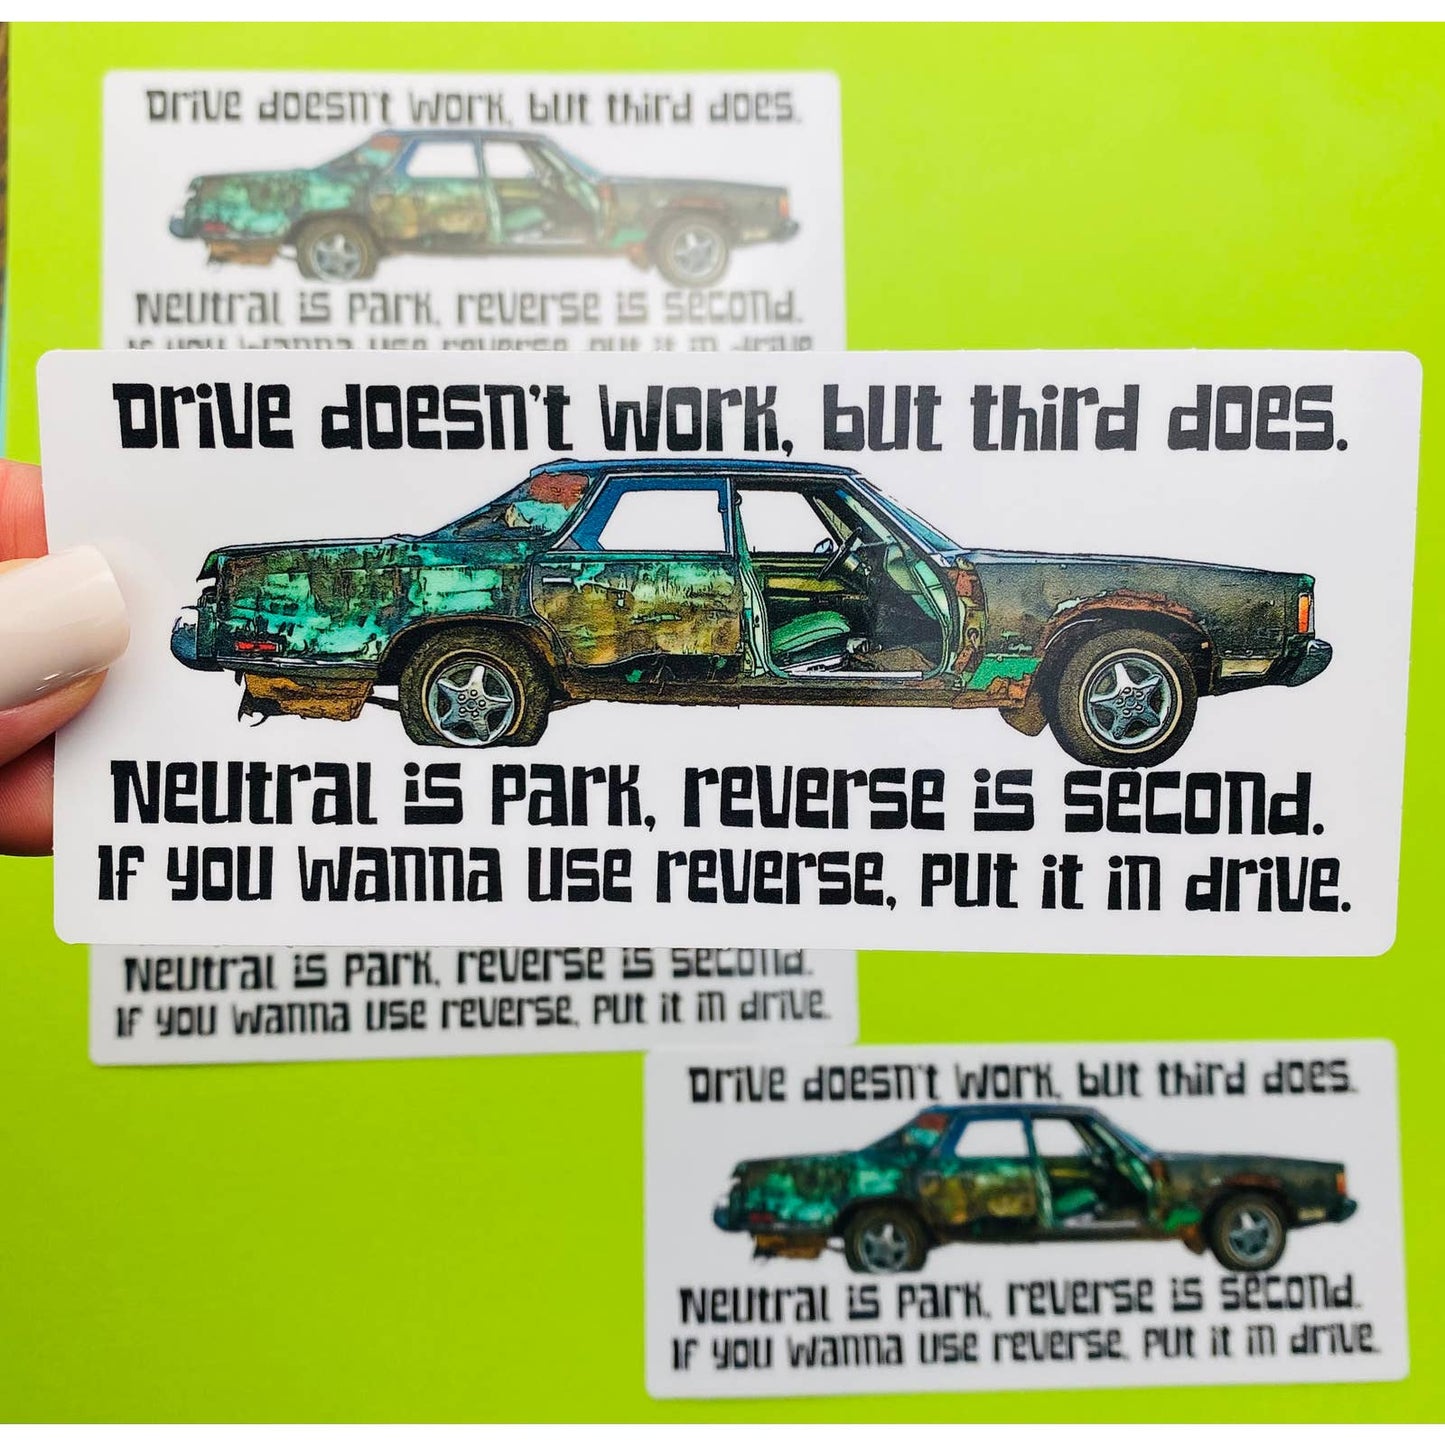 Trailer Park Boys Sticker | Drive Doesn't Work But Third Does, Neutral Is Park, Reverse Is Second | Bumper Sticker